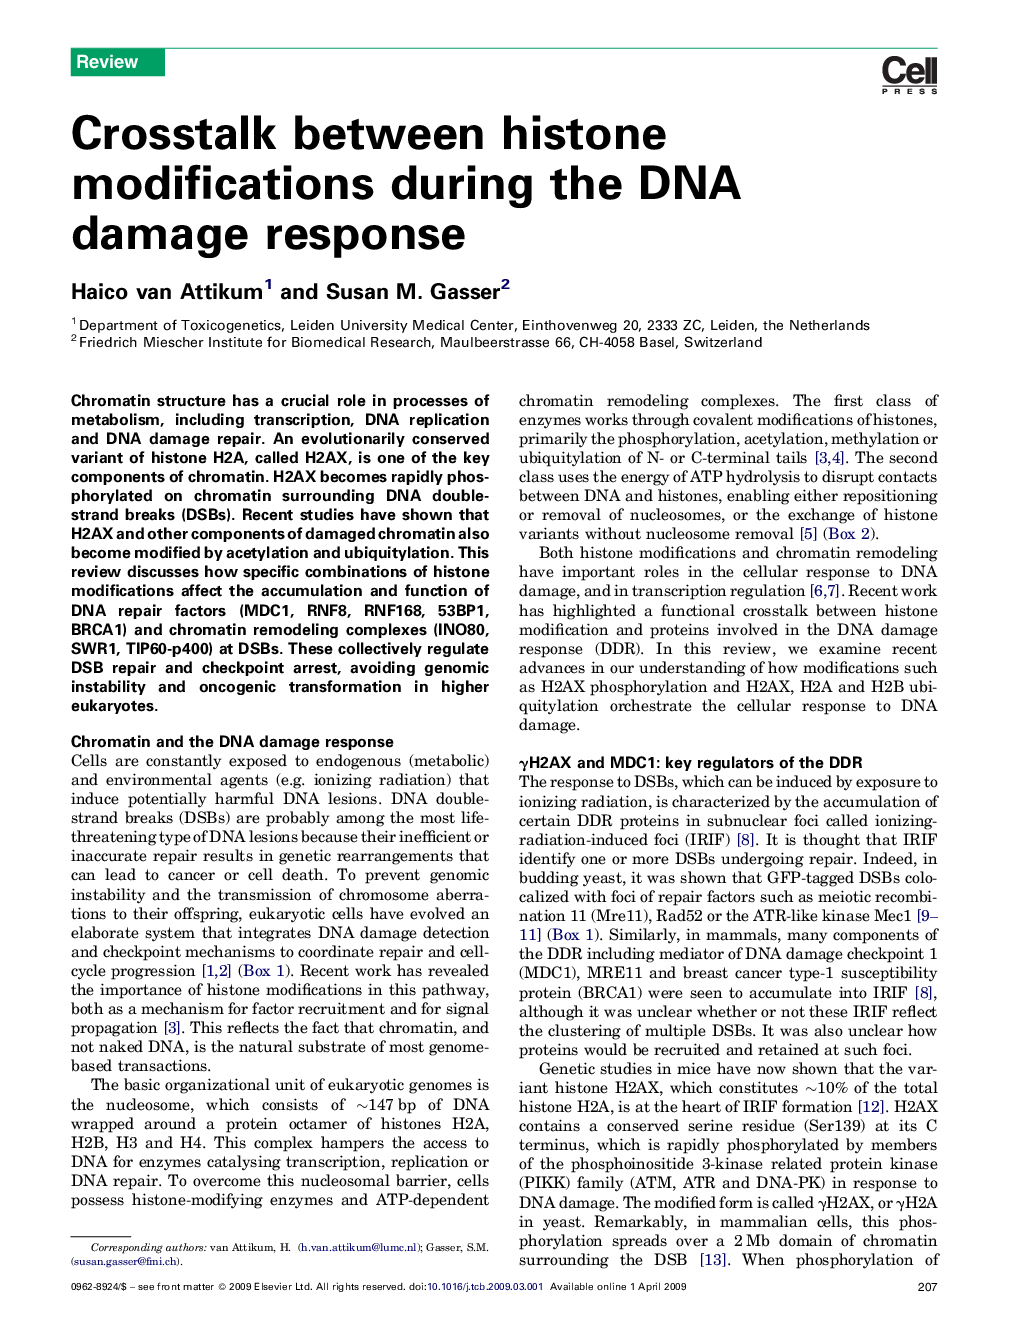 Crosstalk between histone modifications during the DNA damage response